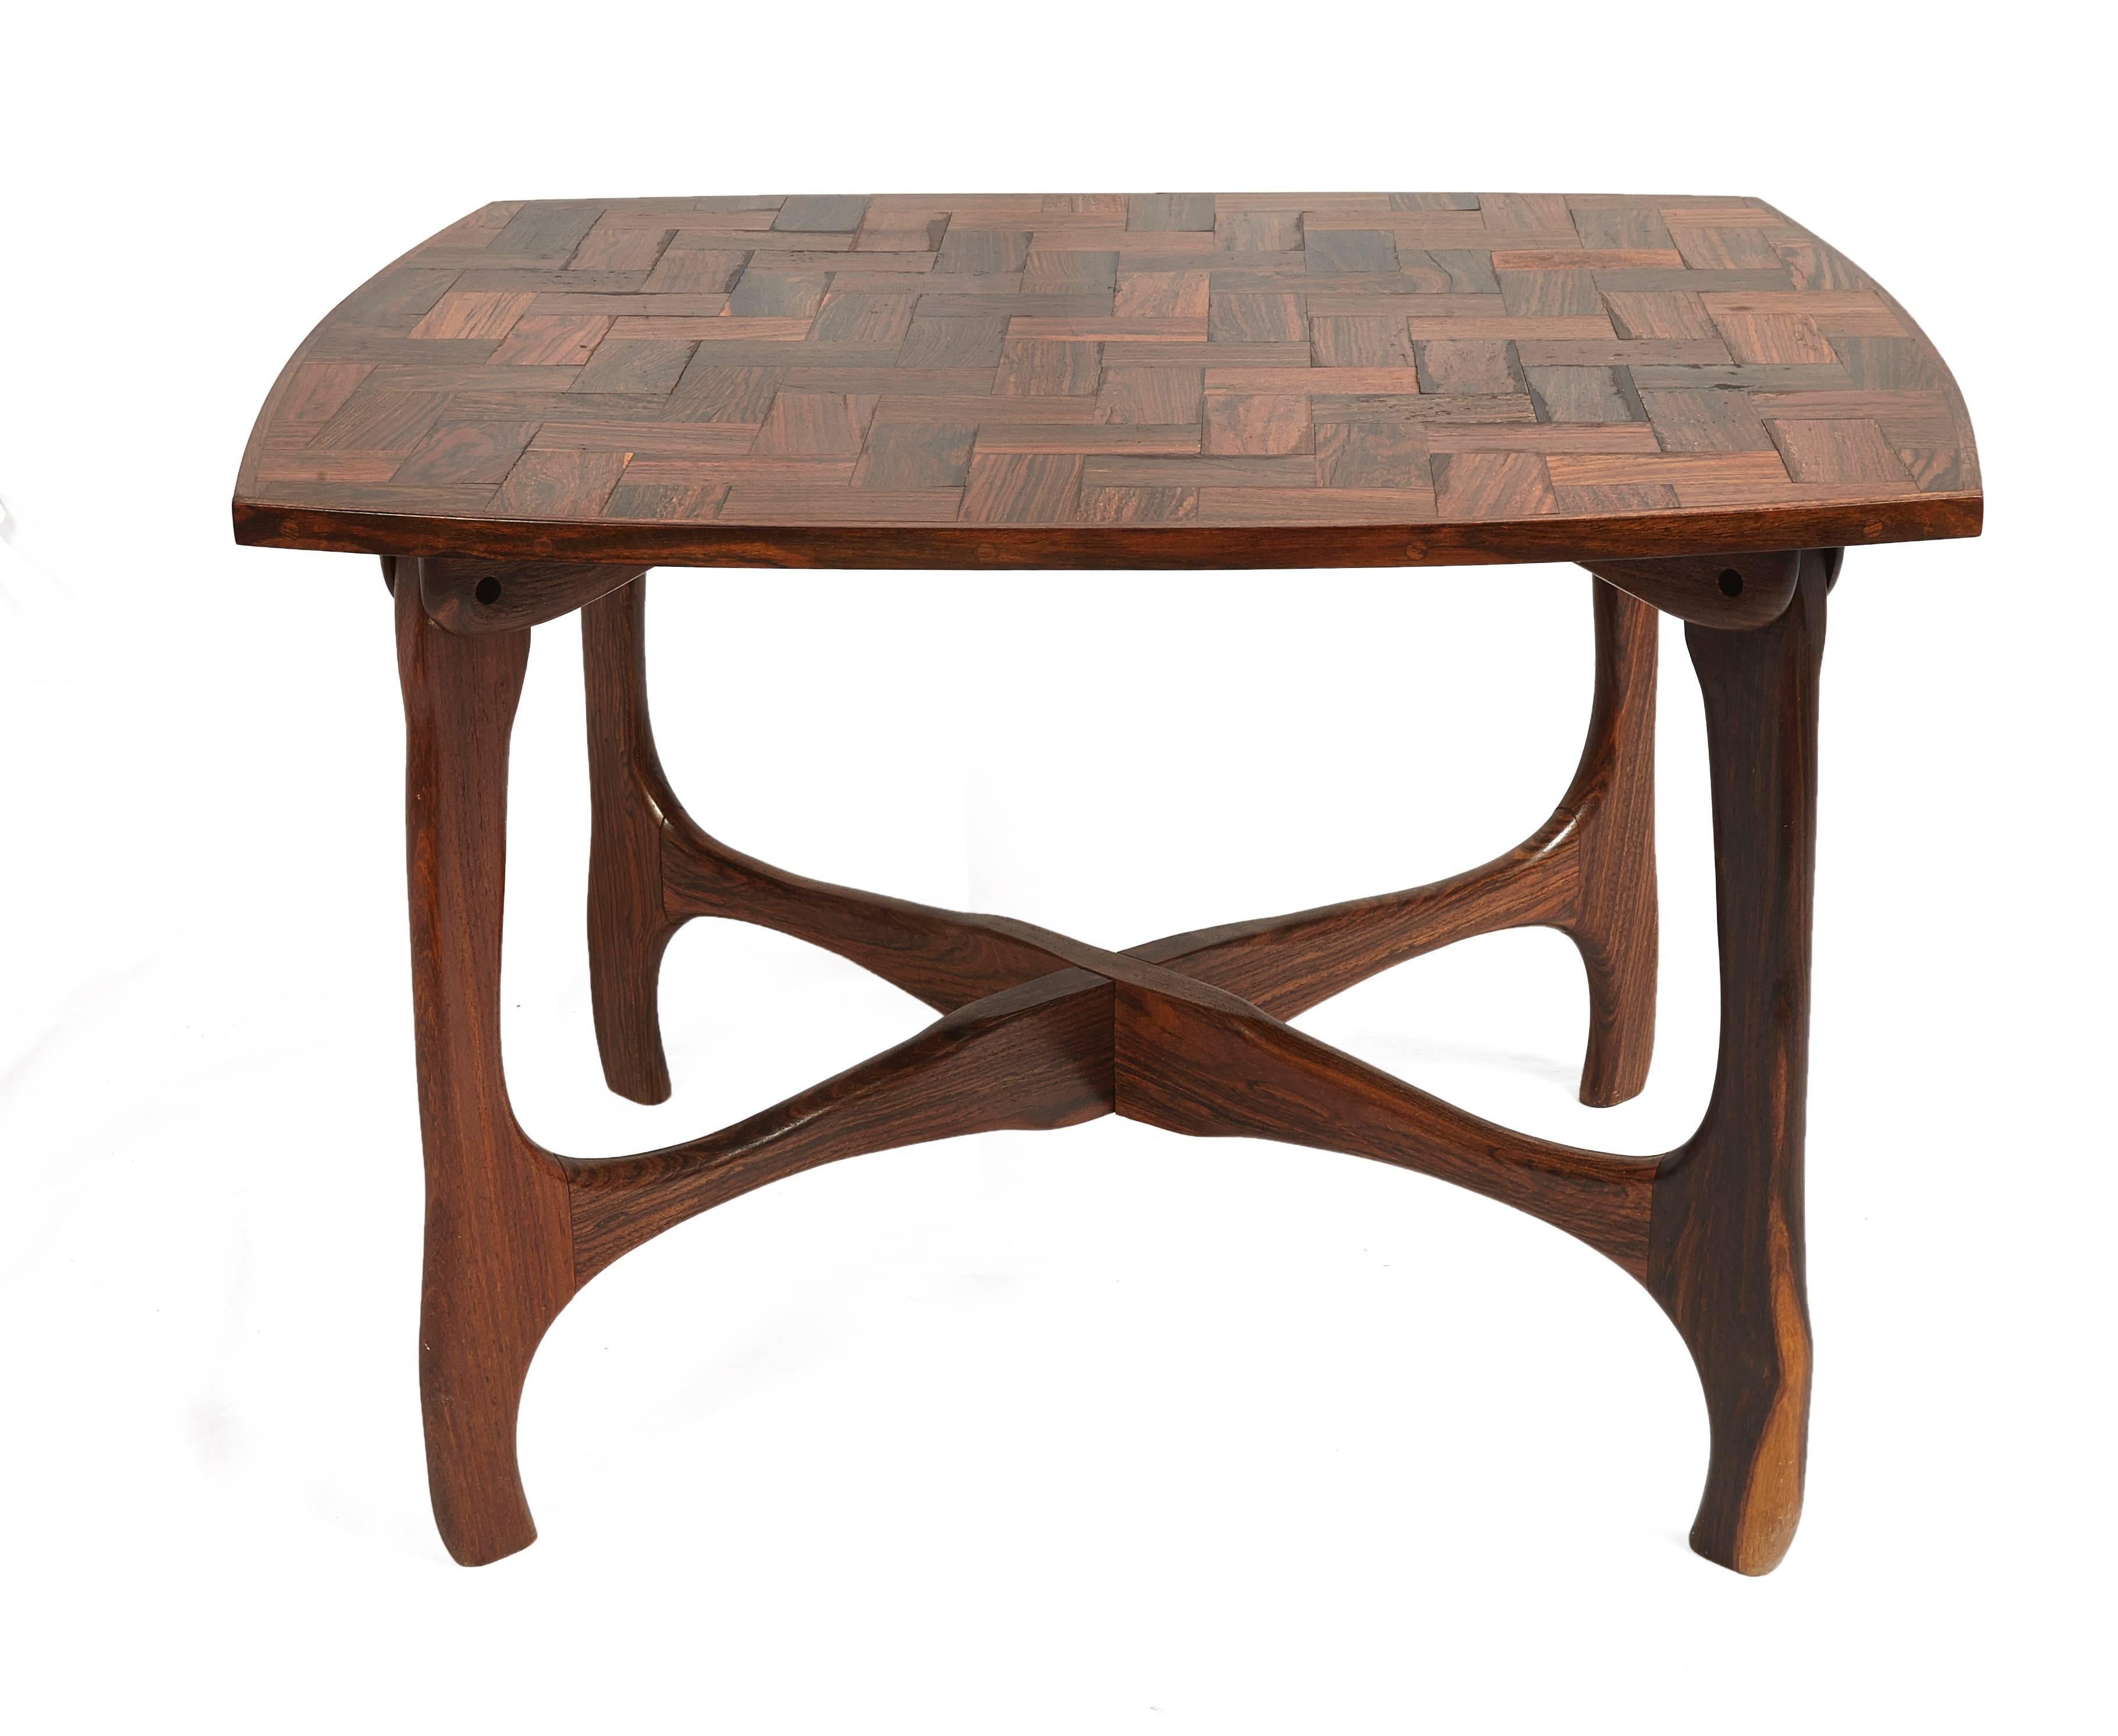 Don shoemaker side table with parquetry top, known as the Cuerno table.
This hard to find table is made of rosewood in the 1960s.